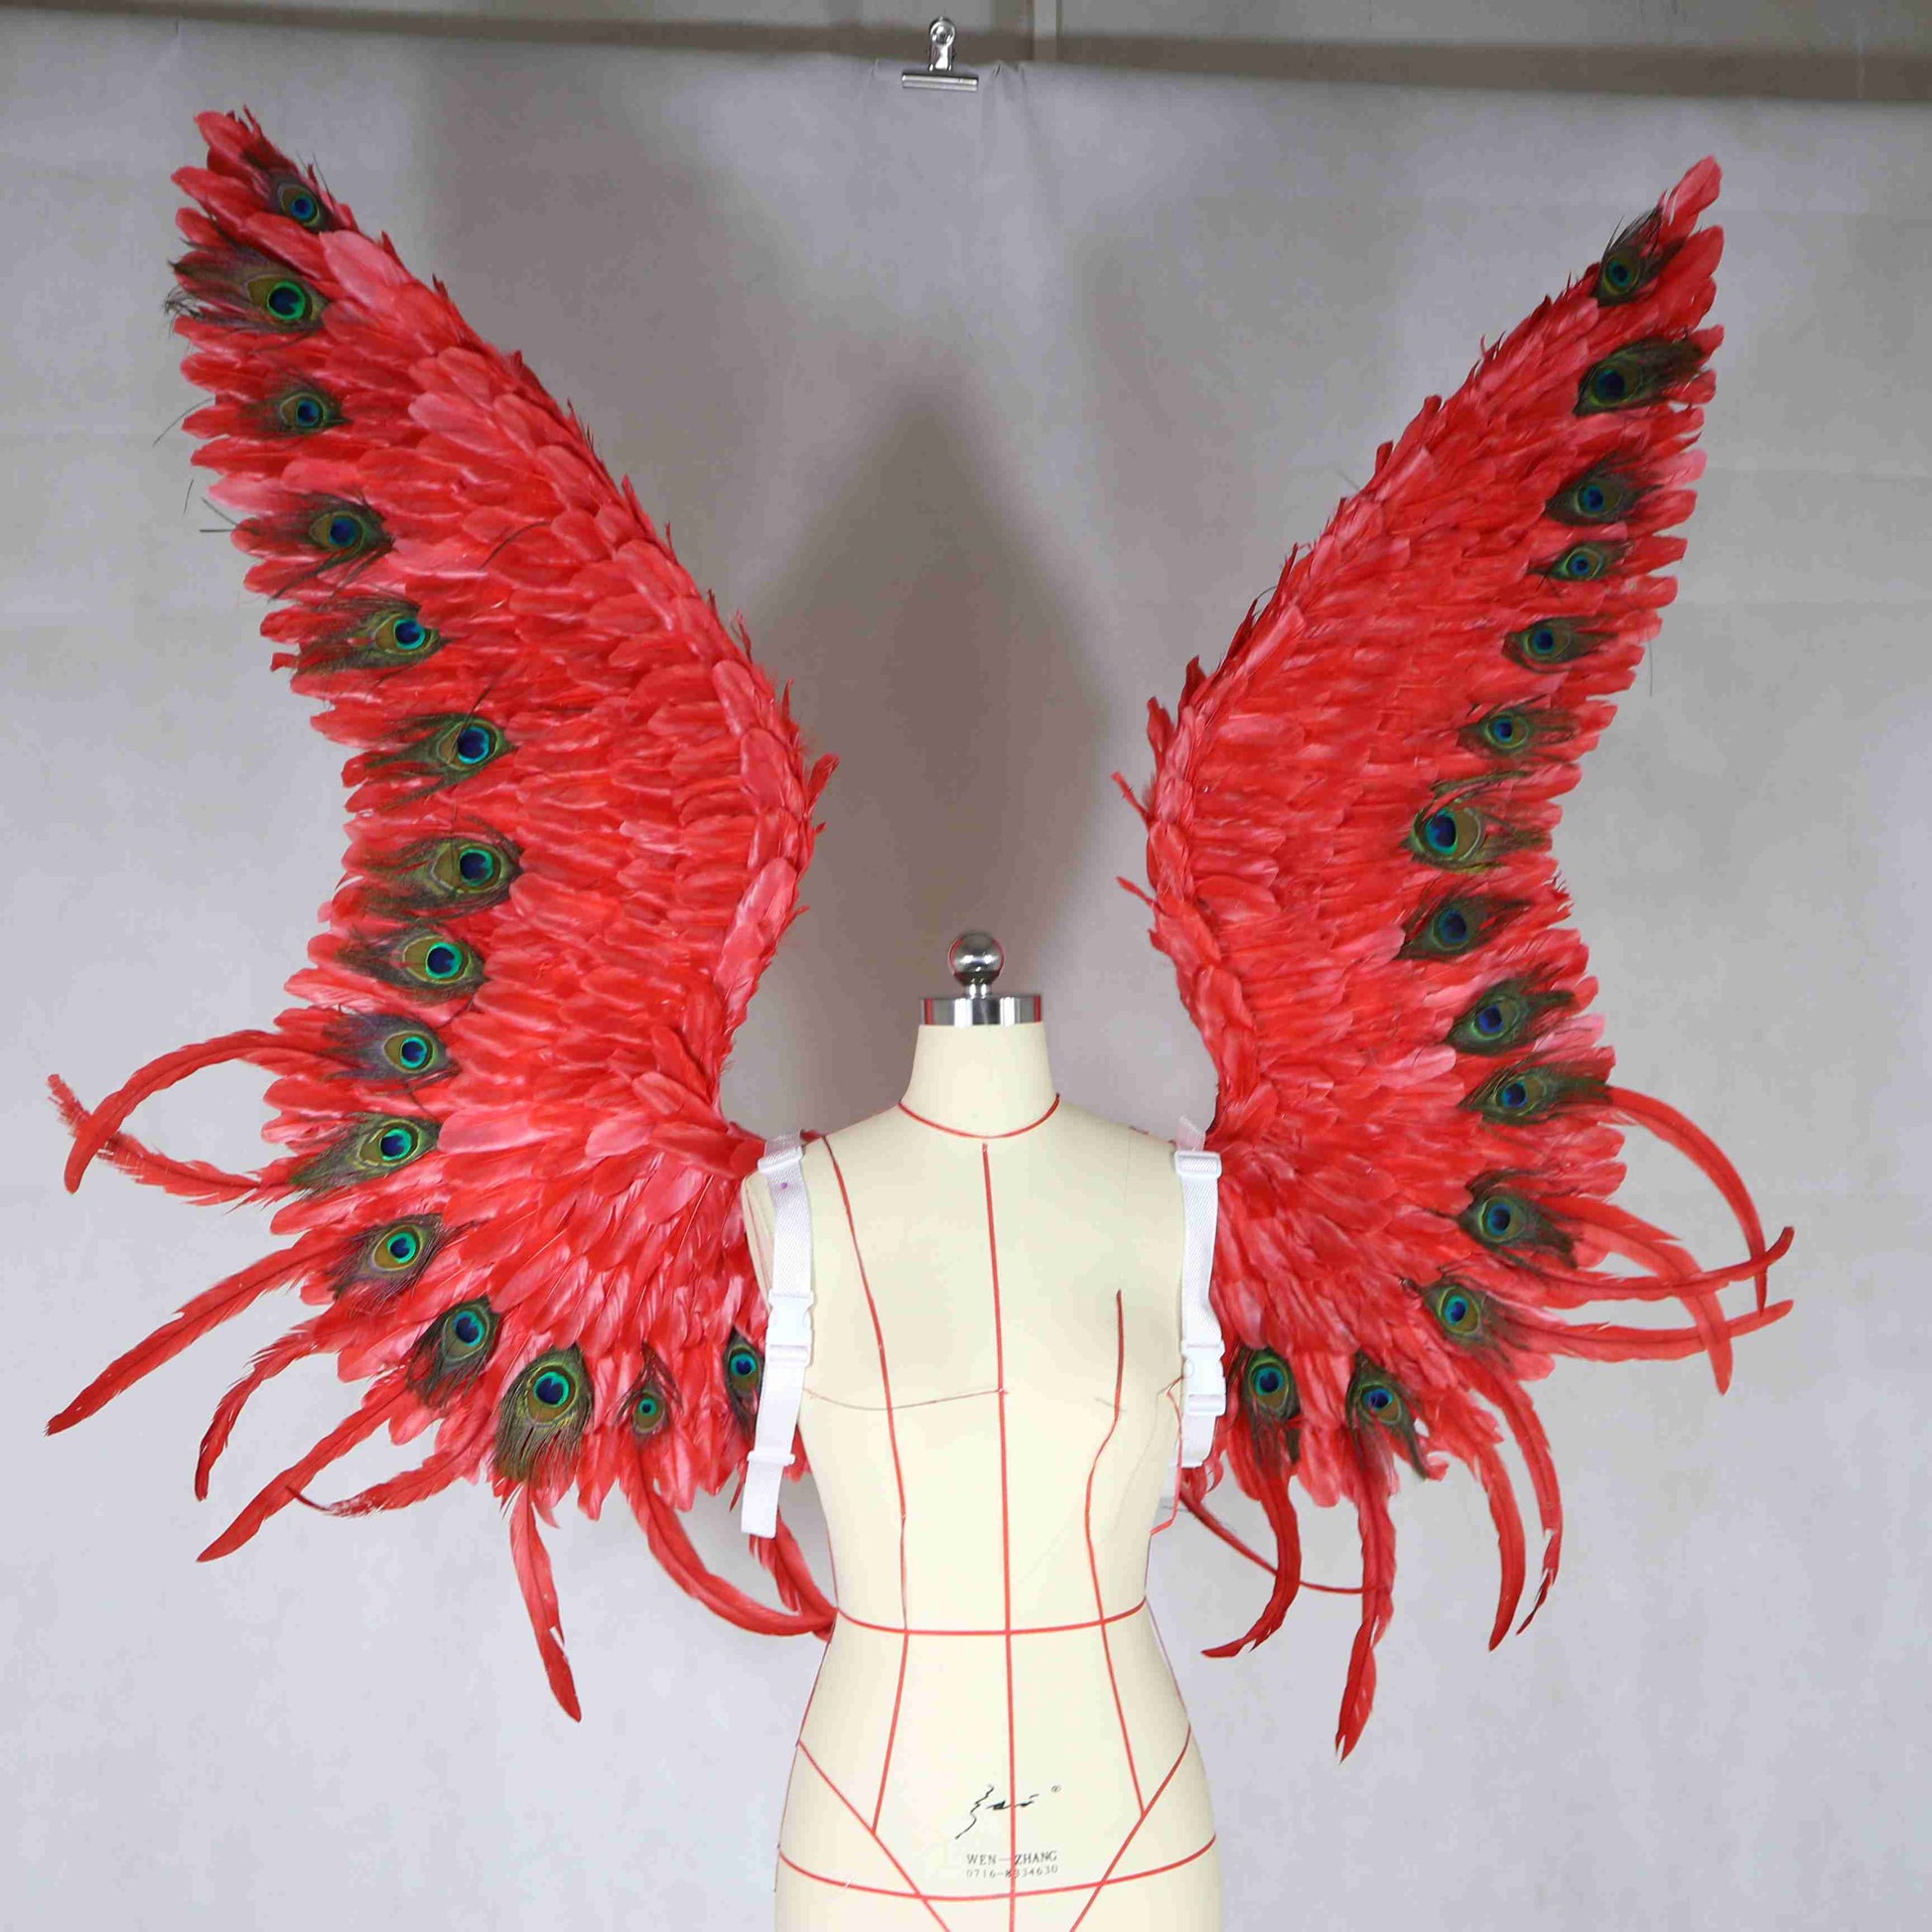 Our red peacock angel wings. Made from goose feathers and peacock feathers. Wings for angel wings costume. Suitable for photoshoots.